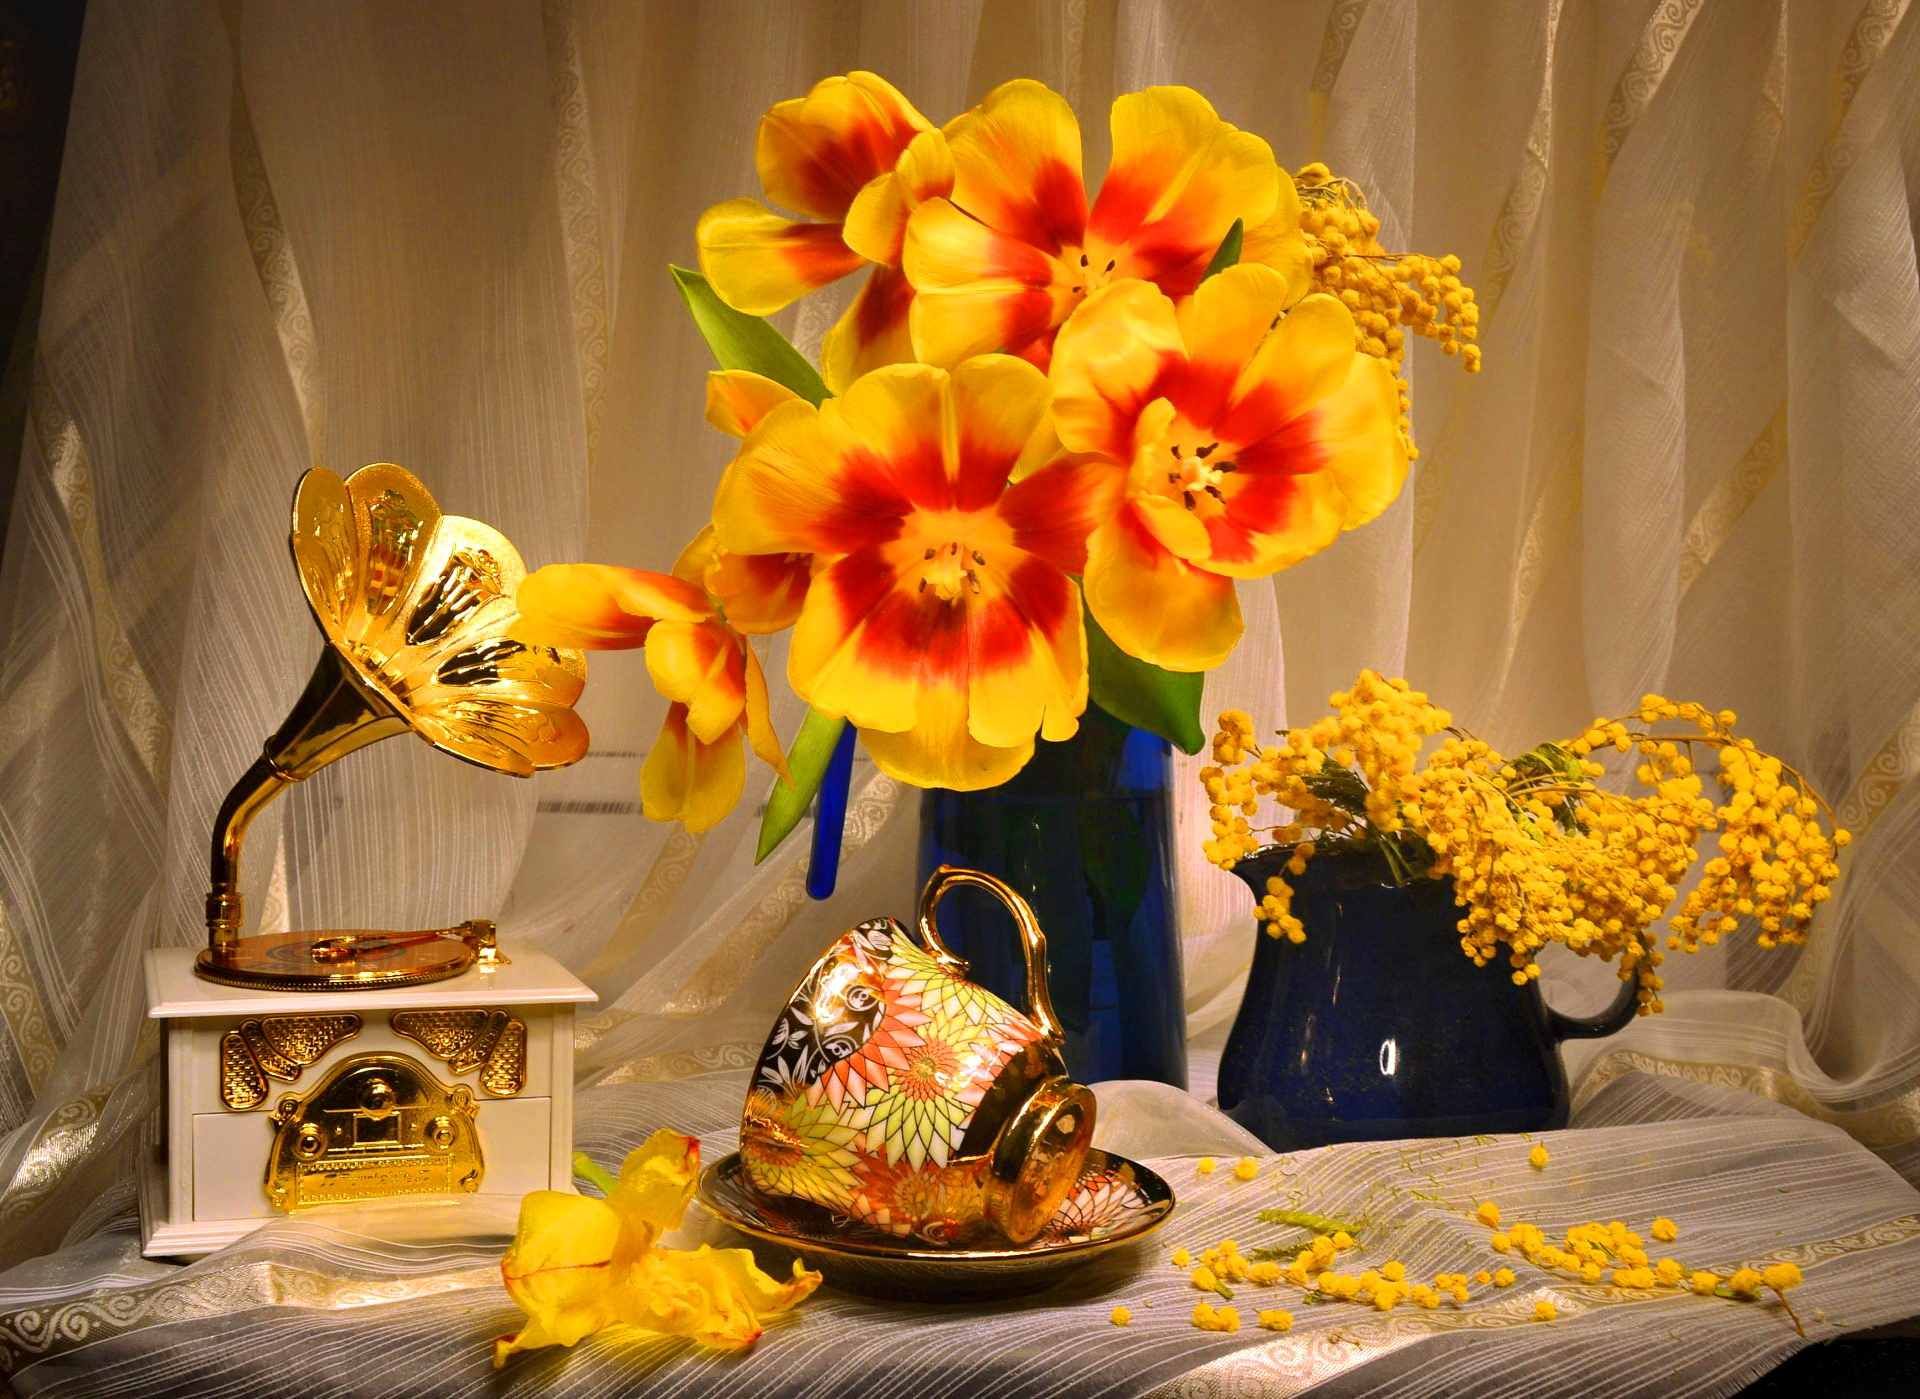 photography, still life, cup, flower, gramophone, tulip, vase, yellow flower